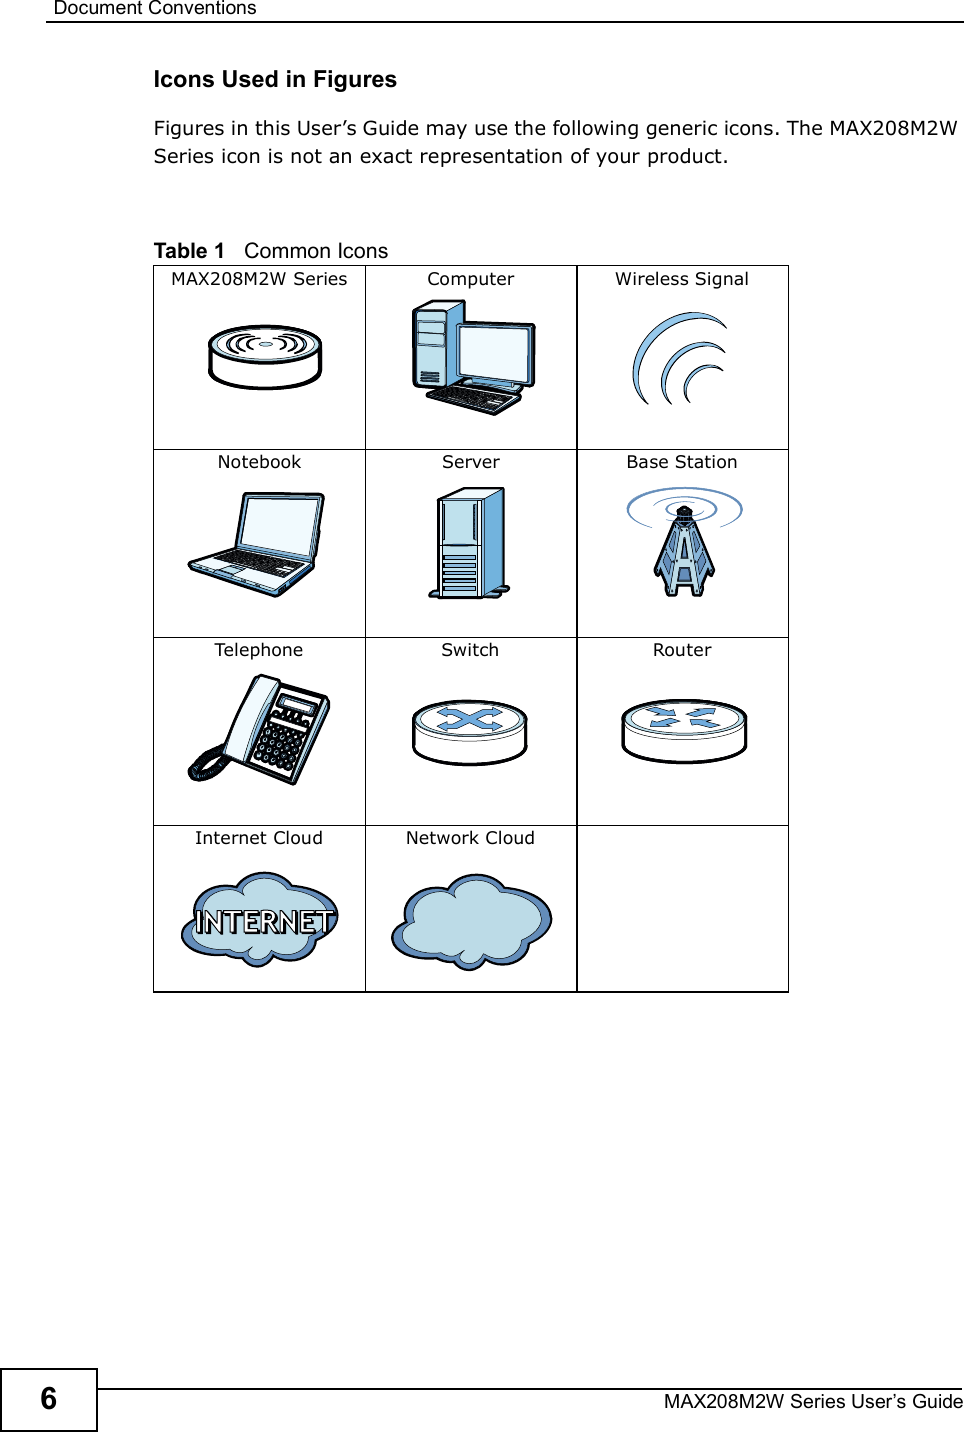 Document ConventionsMAX208M2W Series User s Guide6Icons Used in FiguresFigures in this User s Guide may use the following generic icons. The MAX208M2W Series icon is not an exact representation of your product.Table 1   Common IconsMAX208M2W Series ComputerWireless SignalNotebookServerBase StationTelephoneSwitchRouterInternet CloudNetwork Cloud